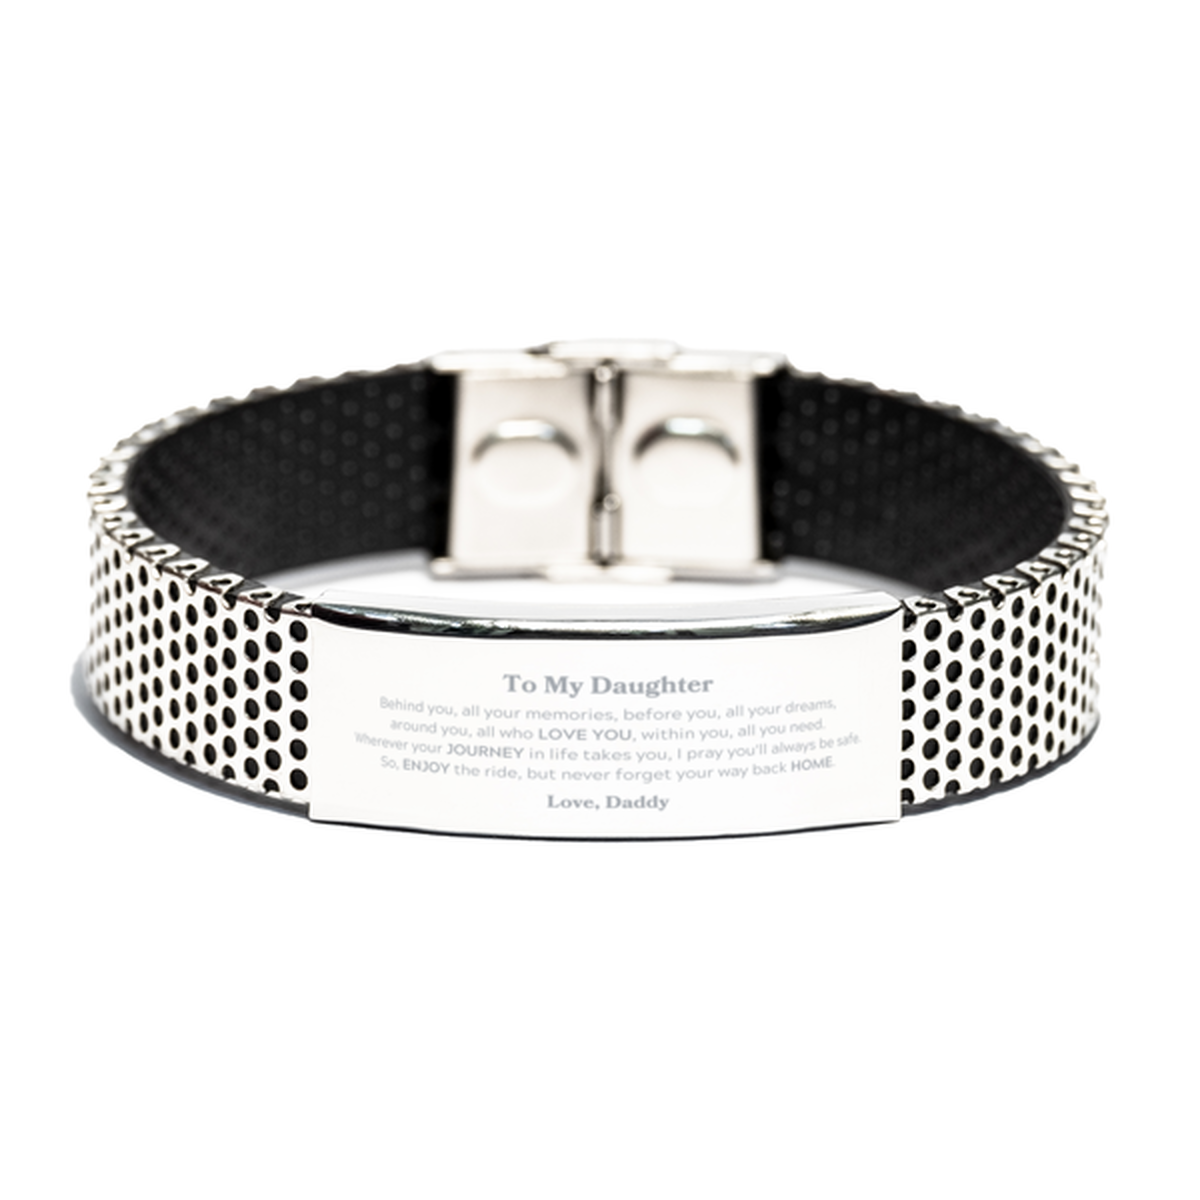 To My Daughter Graduation Gifts from Daddy, Daughter Stainless Steel Bracelet Christmas Birthday Gifts for Daughter Behind you, all your memories, before you, all your dreams. Love, Daddy